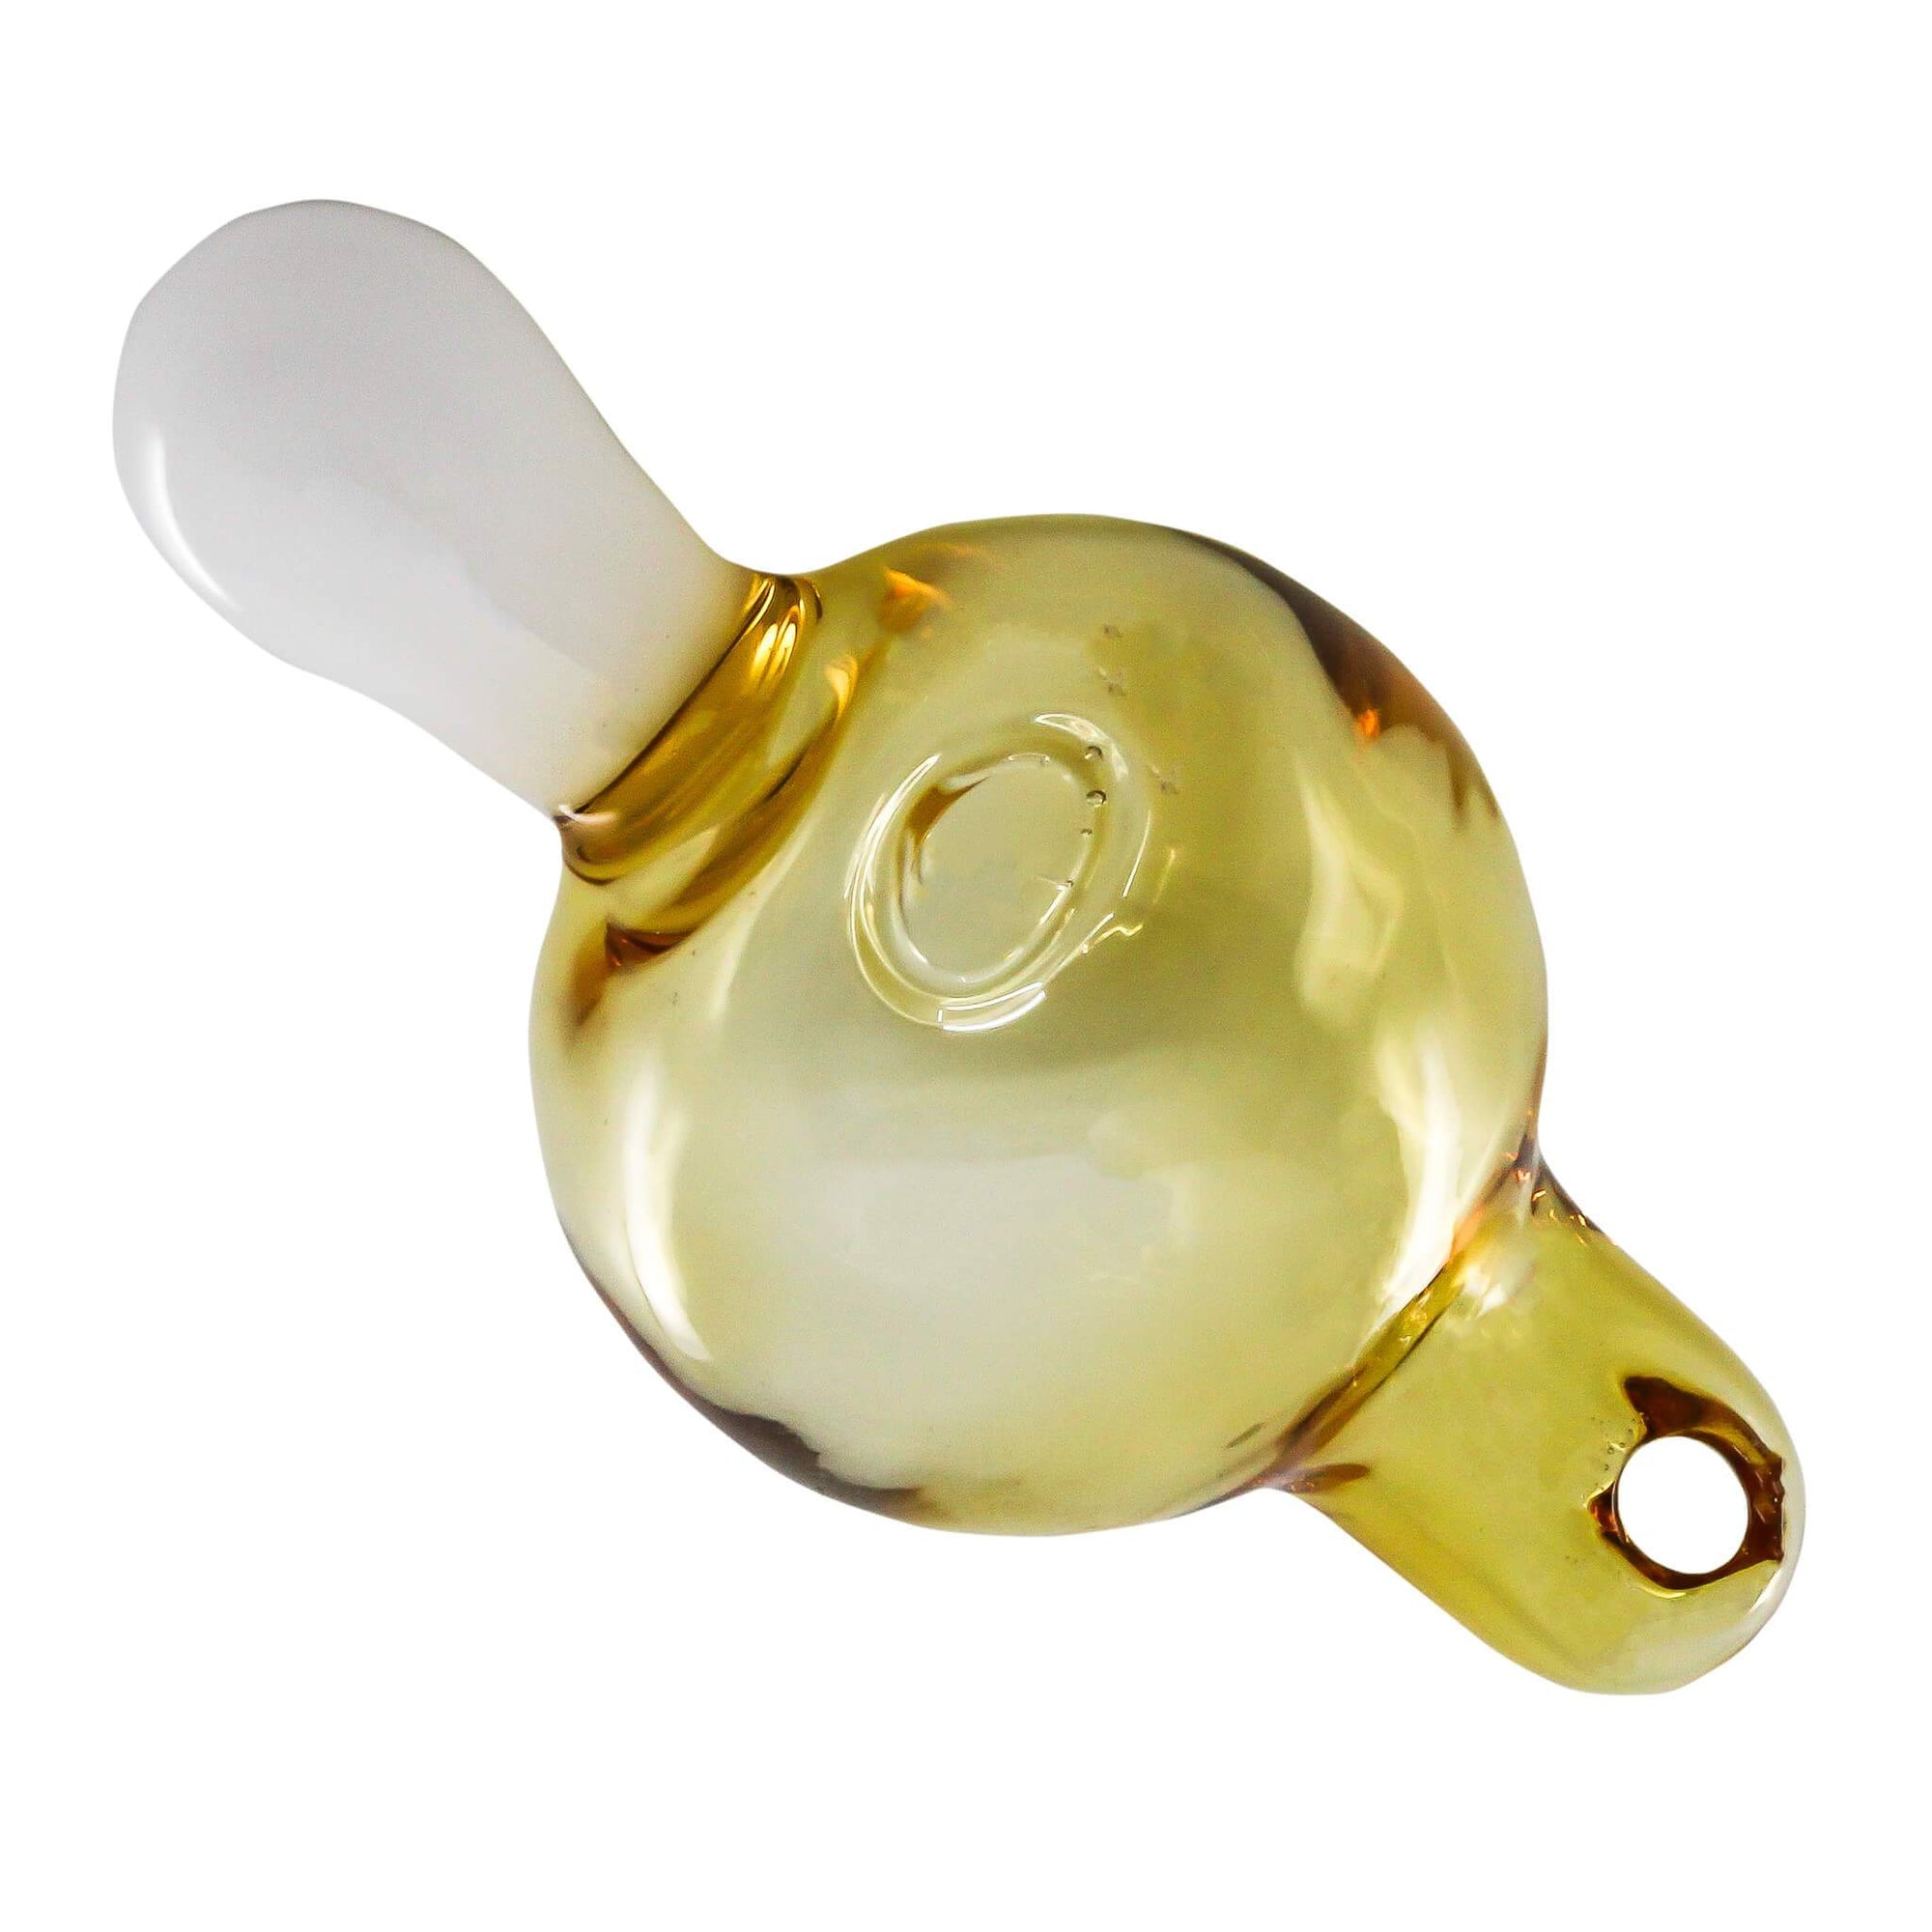 25mm Mini Enail Complete Dabbing Kit #1 | Bubble Cap Yellow | the dabbing specialists